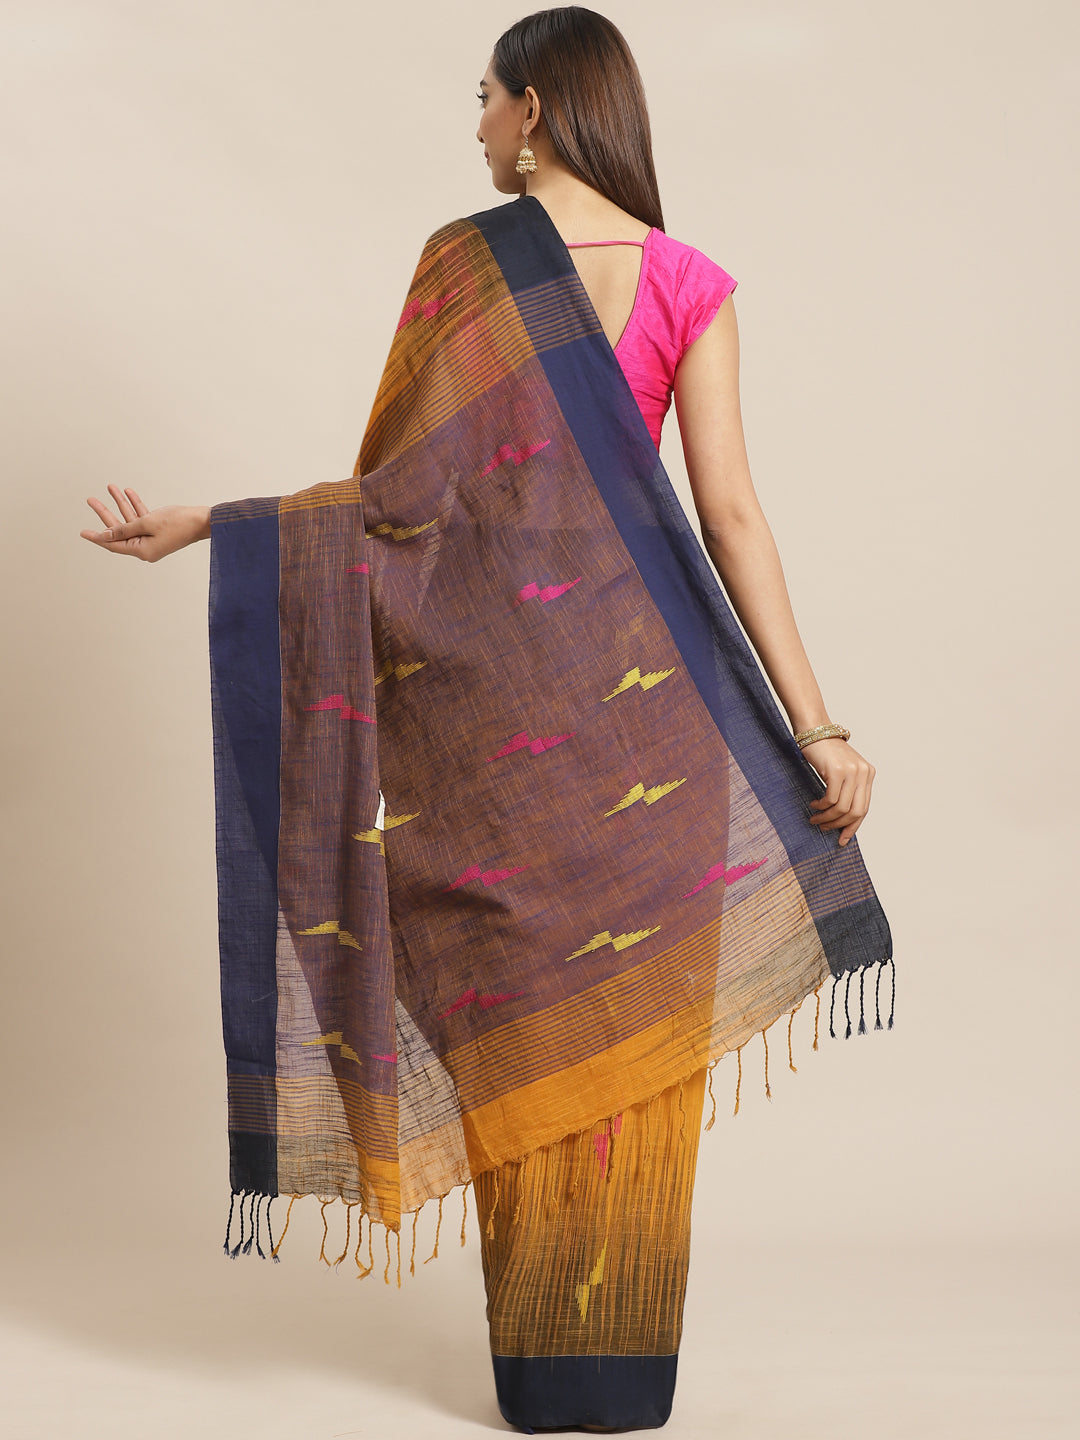 Mustard and Blue, Kalakari India Cotton Mustard Hand crafted saree with blouse SHBESA0001-Saree-Kalakari India-SHBESA0001-Bengal, Cotton, Geographical Indication, Hand Crafted, Heritage Prints, Ikkat, Natural Dyes, Red, Sarees, Sustainable Fabrics, Woven, Yellow-[Linen,Ethnic,wear,Fashionista,Handloom,Handicraft,Indigo,blockprint,block,print,Cotton,Chanderi,Blue, latest,classy,party,bollywood,trendy,summer,style,traditional,formal,elegant,unique,style,hand,block,print, dabu,booti,gift,present,gl